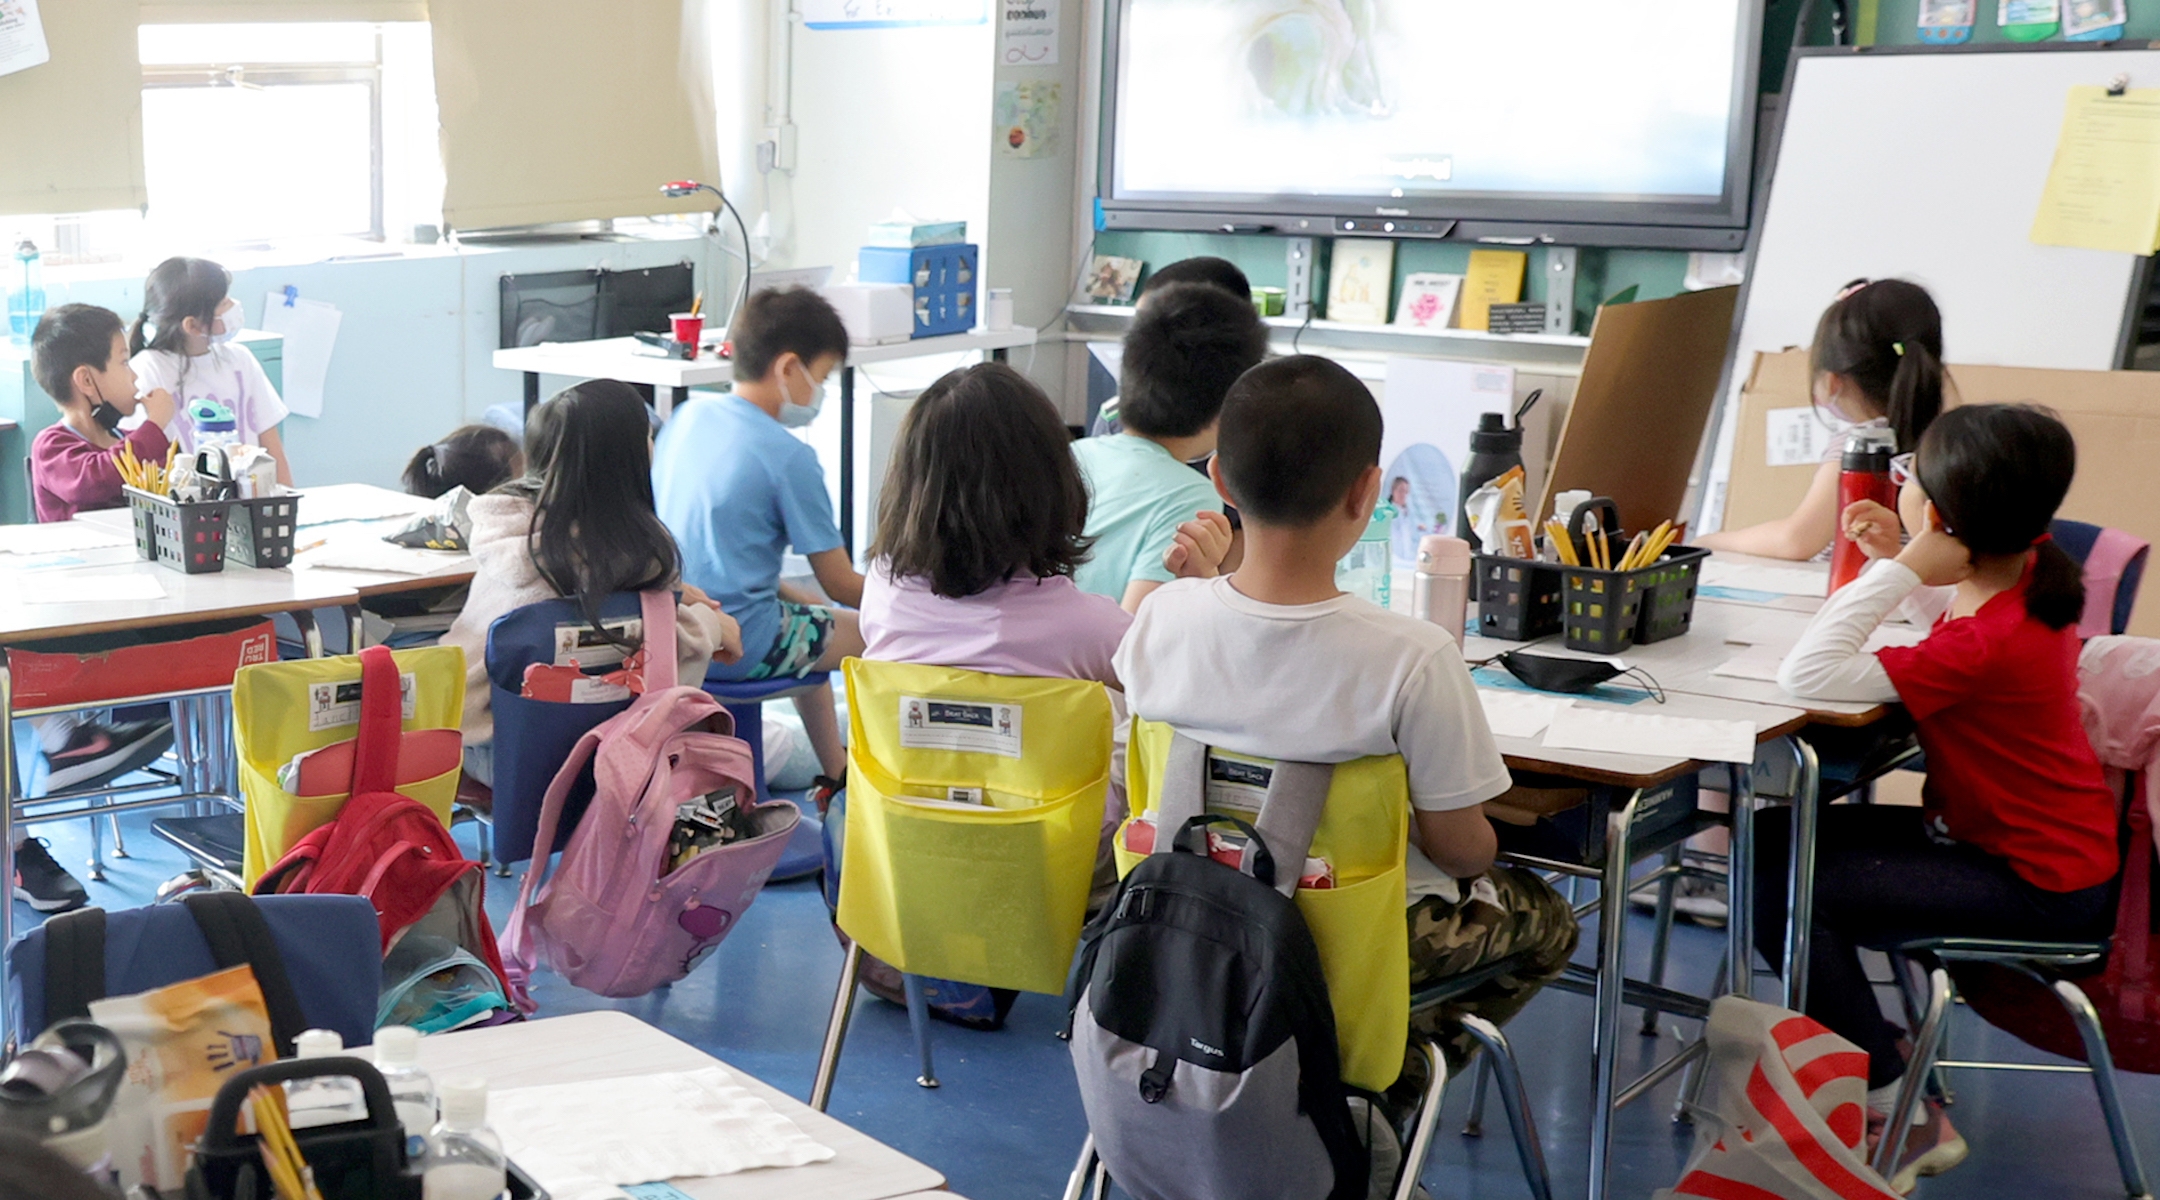 Students in class at New York City’s P.S. 124, the Yung Wing School, on June 24, 2022. (Michael Loccisano/Getty Images)